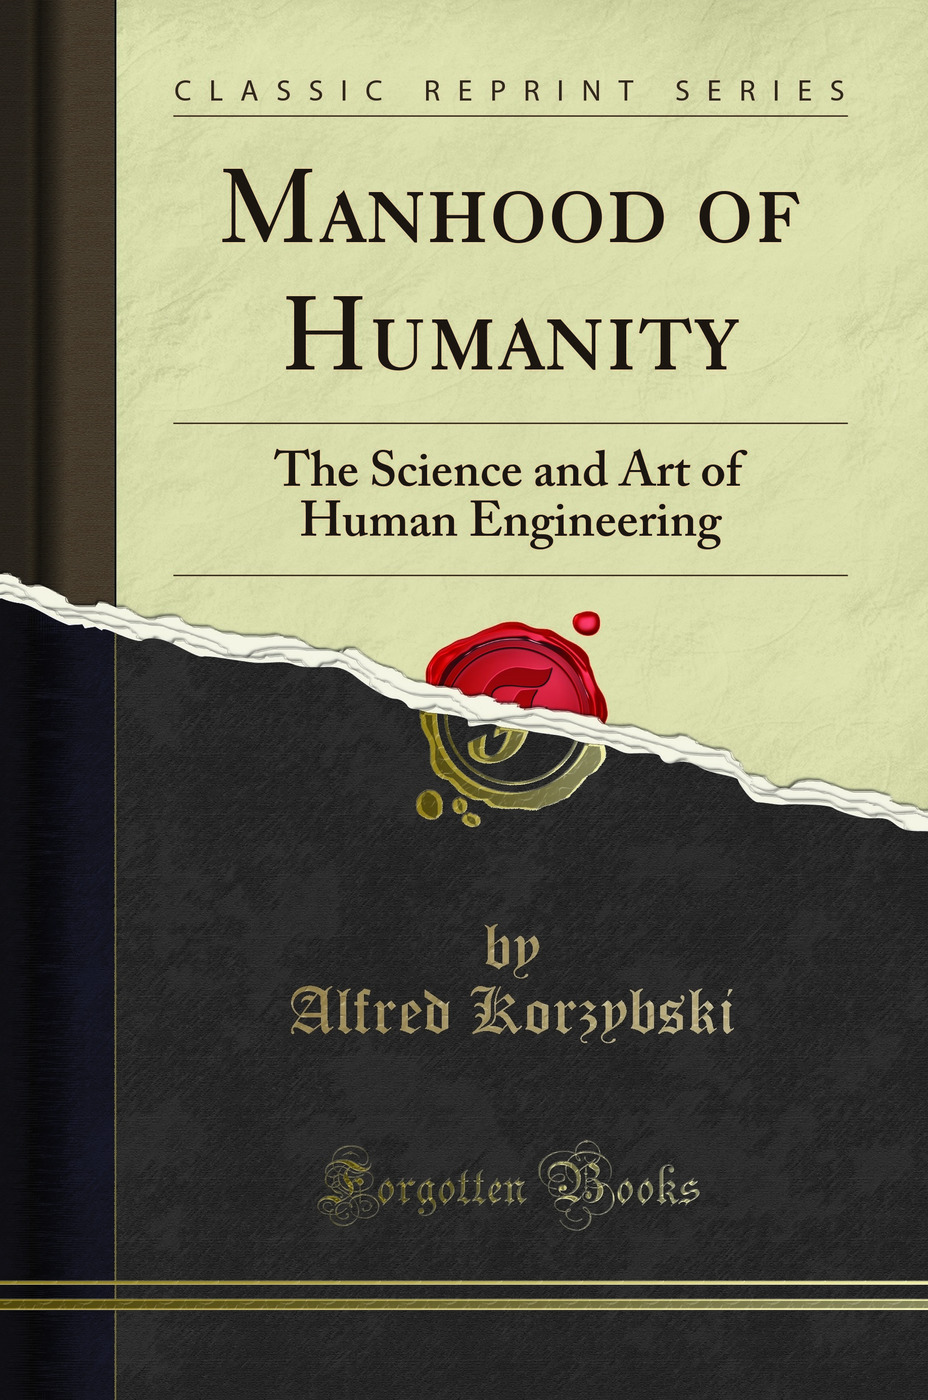 Manhood of Humanity: The Science and Art of Human Engineering (Classic Reprint) - Alfred Korzybski